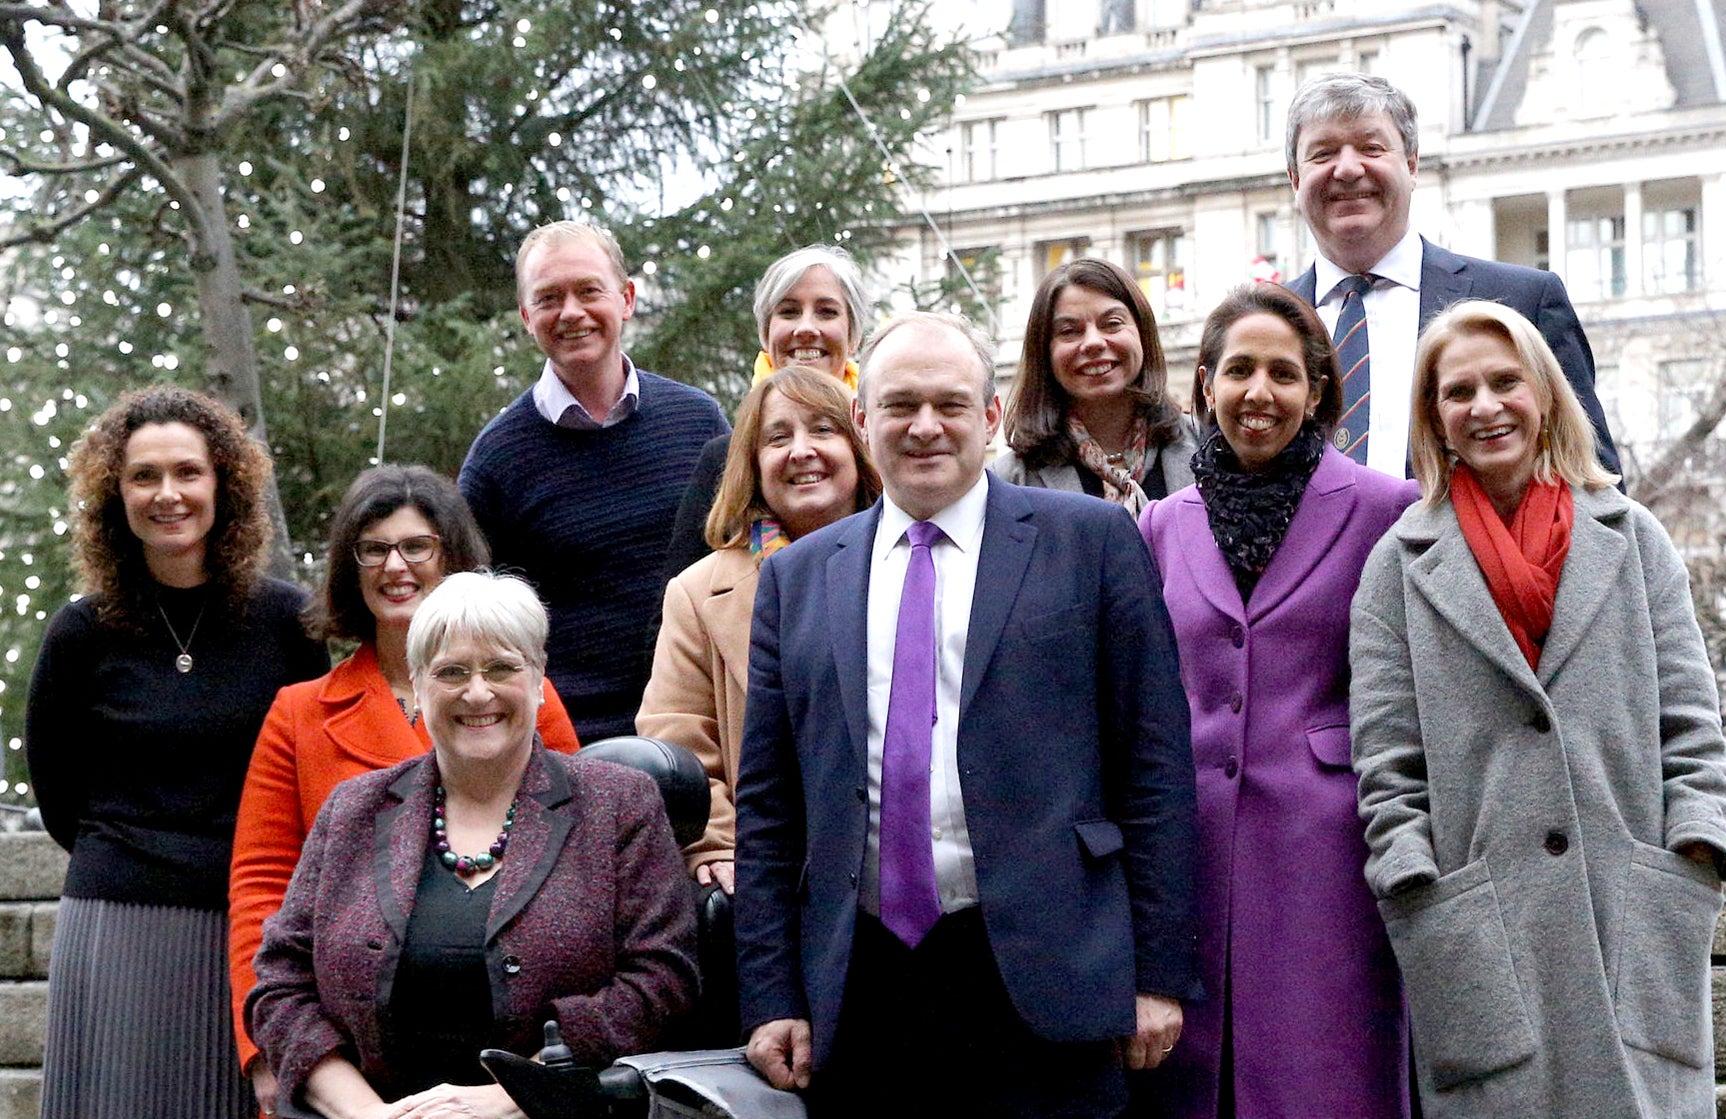 MPs including Layla Moran (middle row, second from left), Christine Jardine (middle row, third from left), and Ed Davey (front and centre)